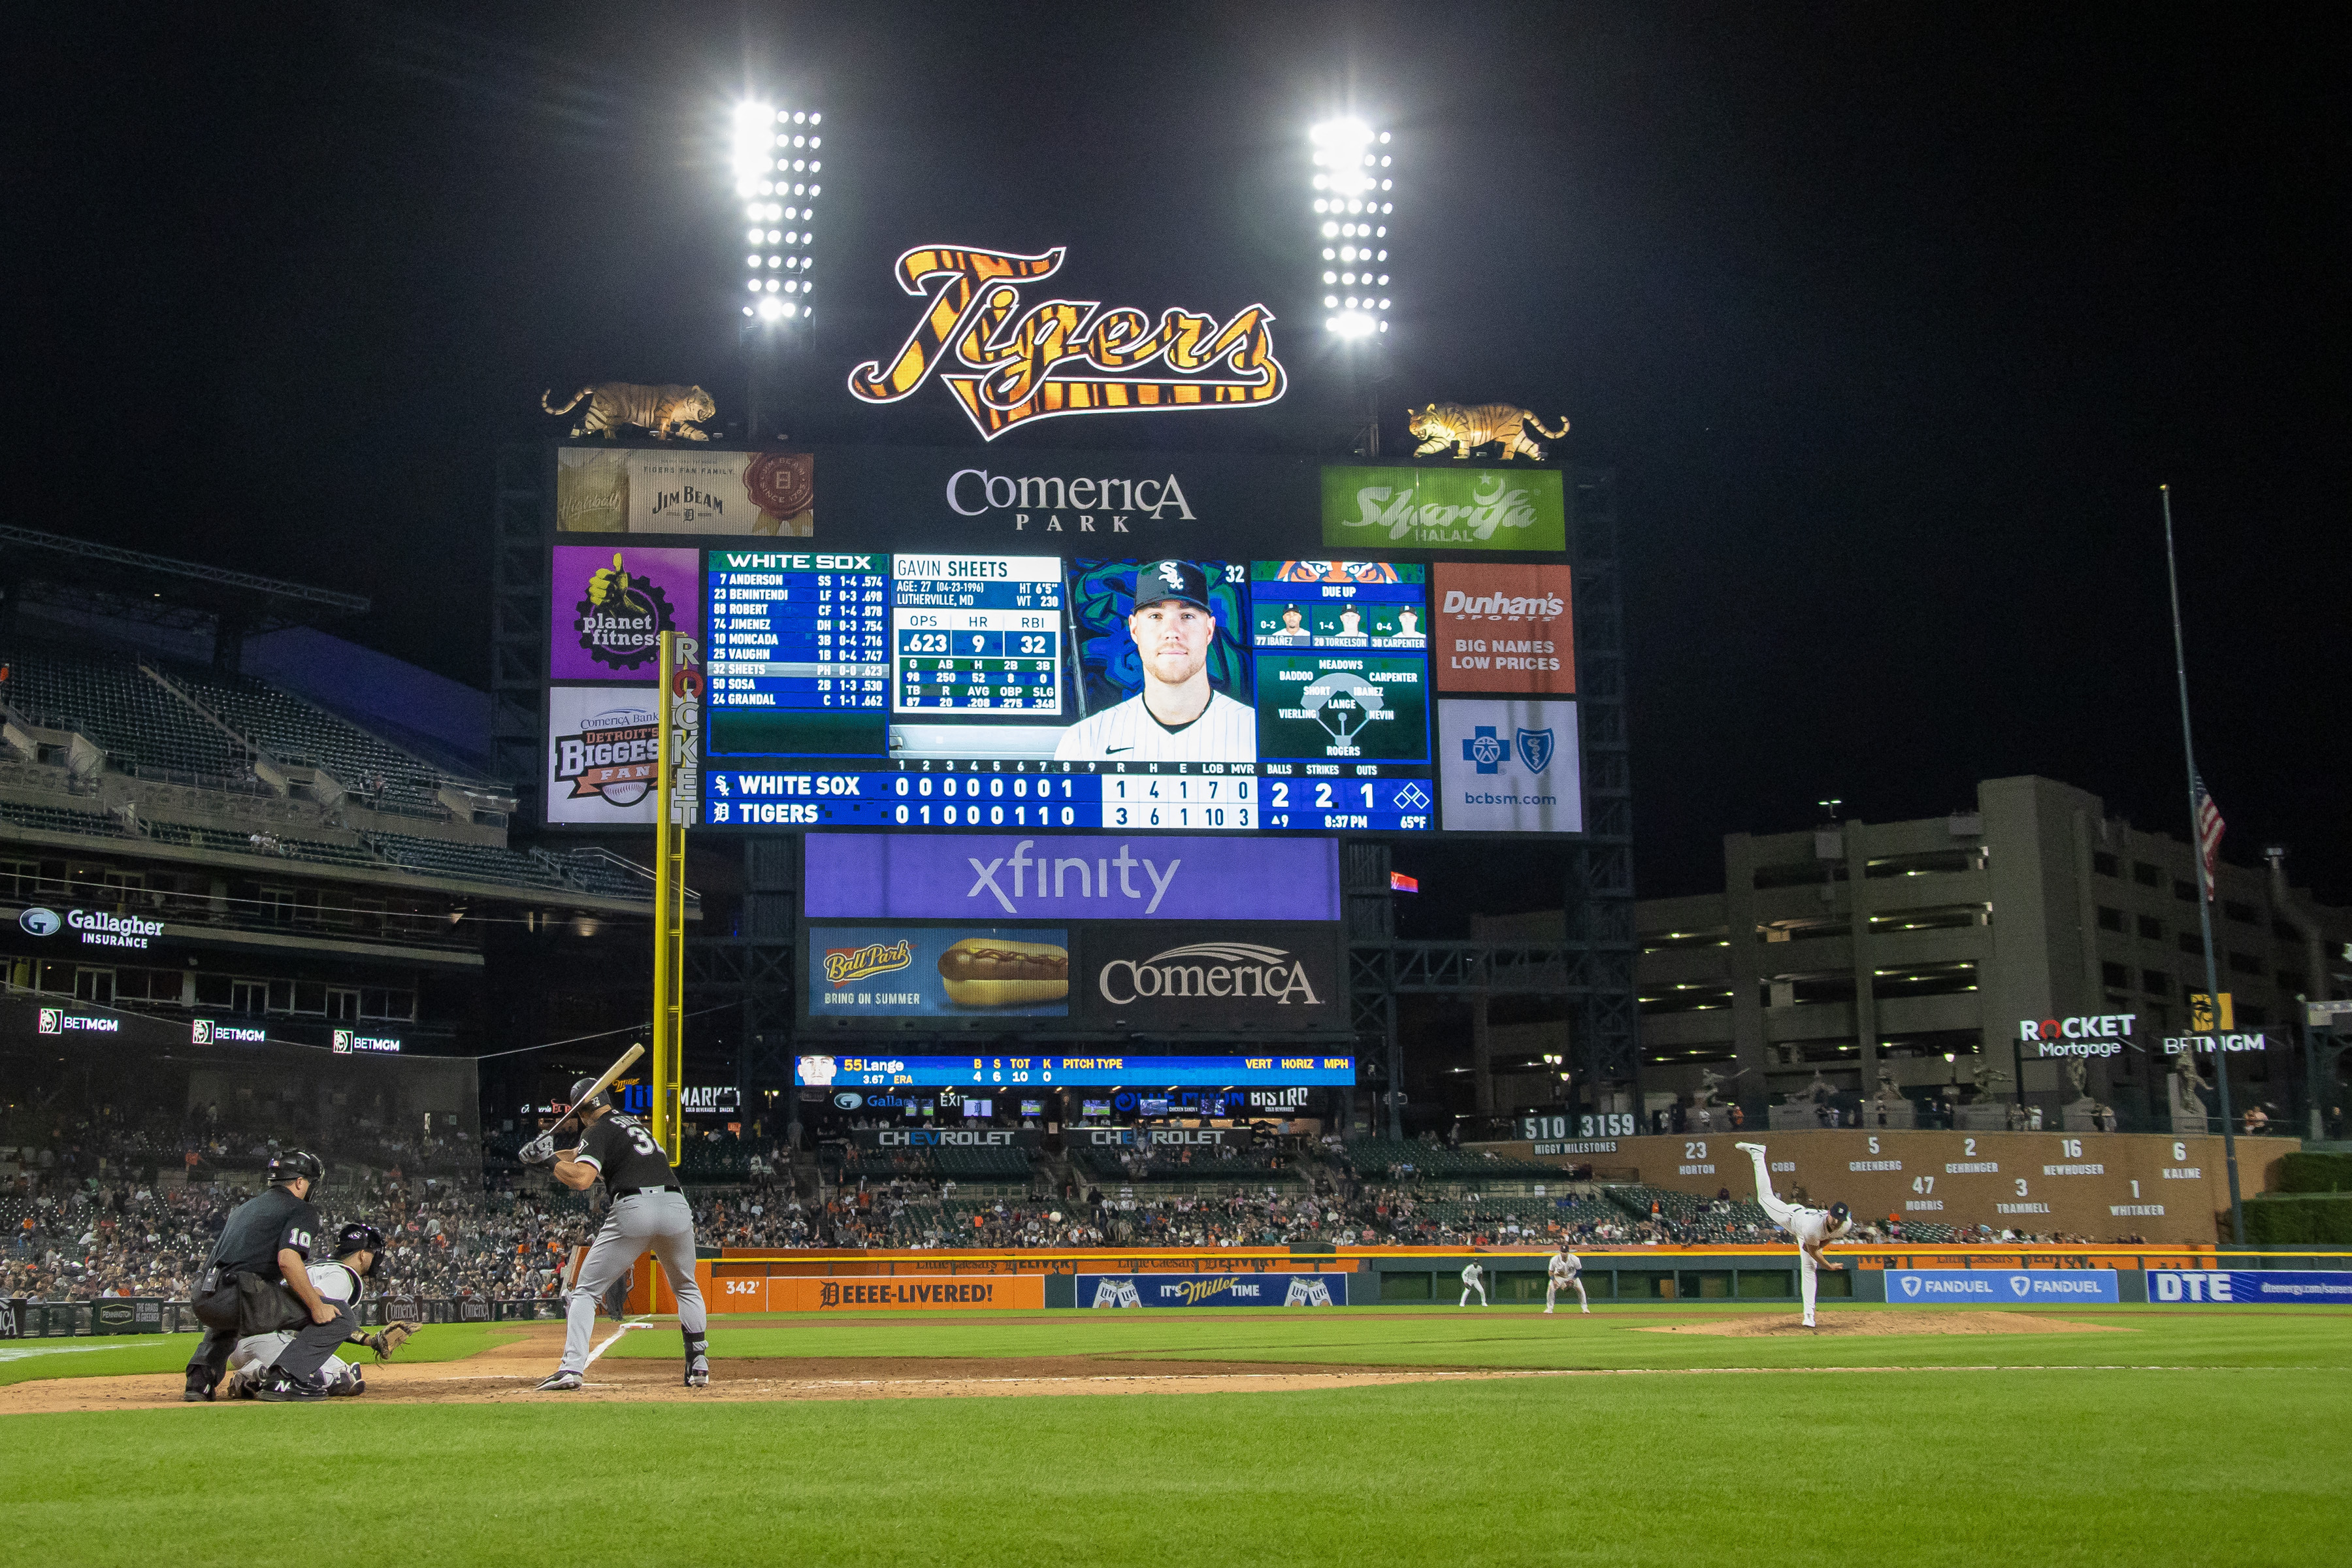 White Sox 6, Tigers 4